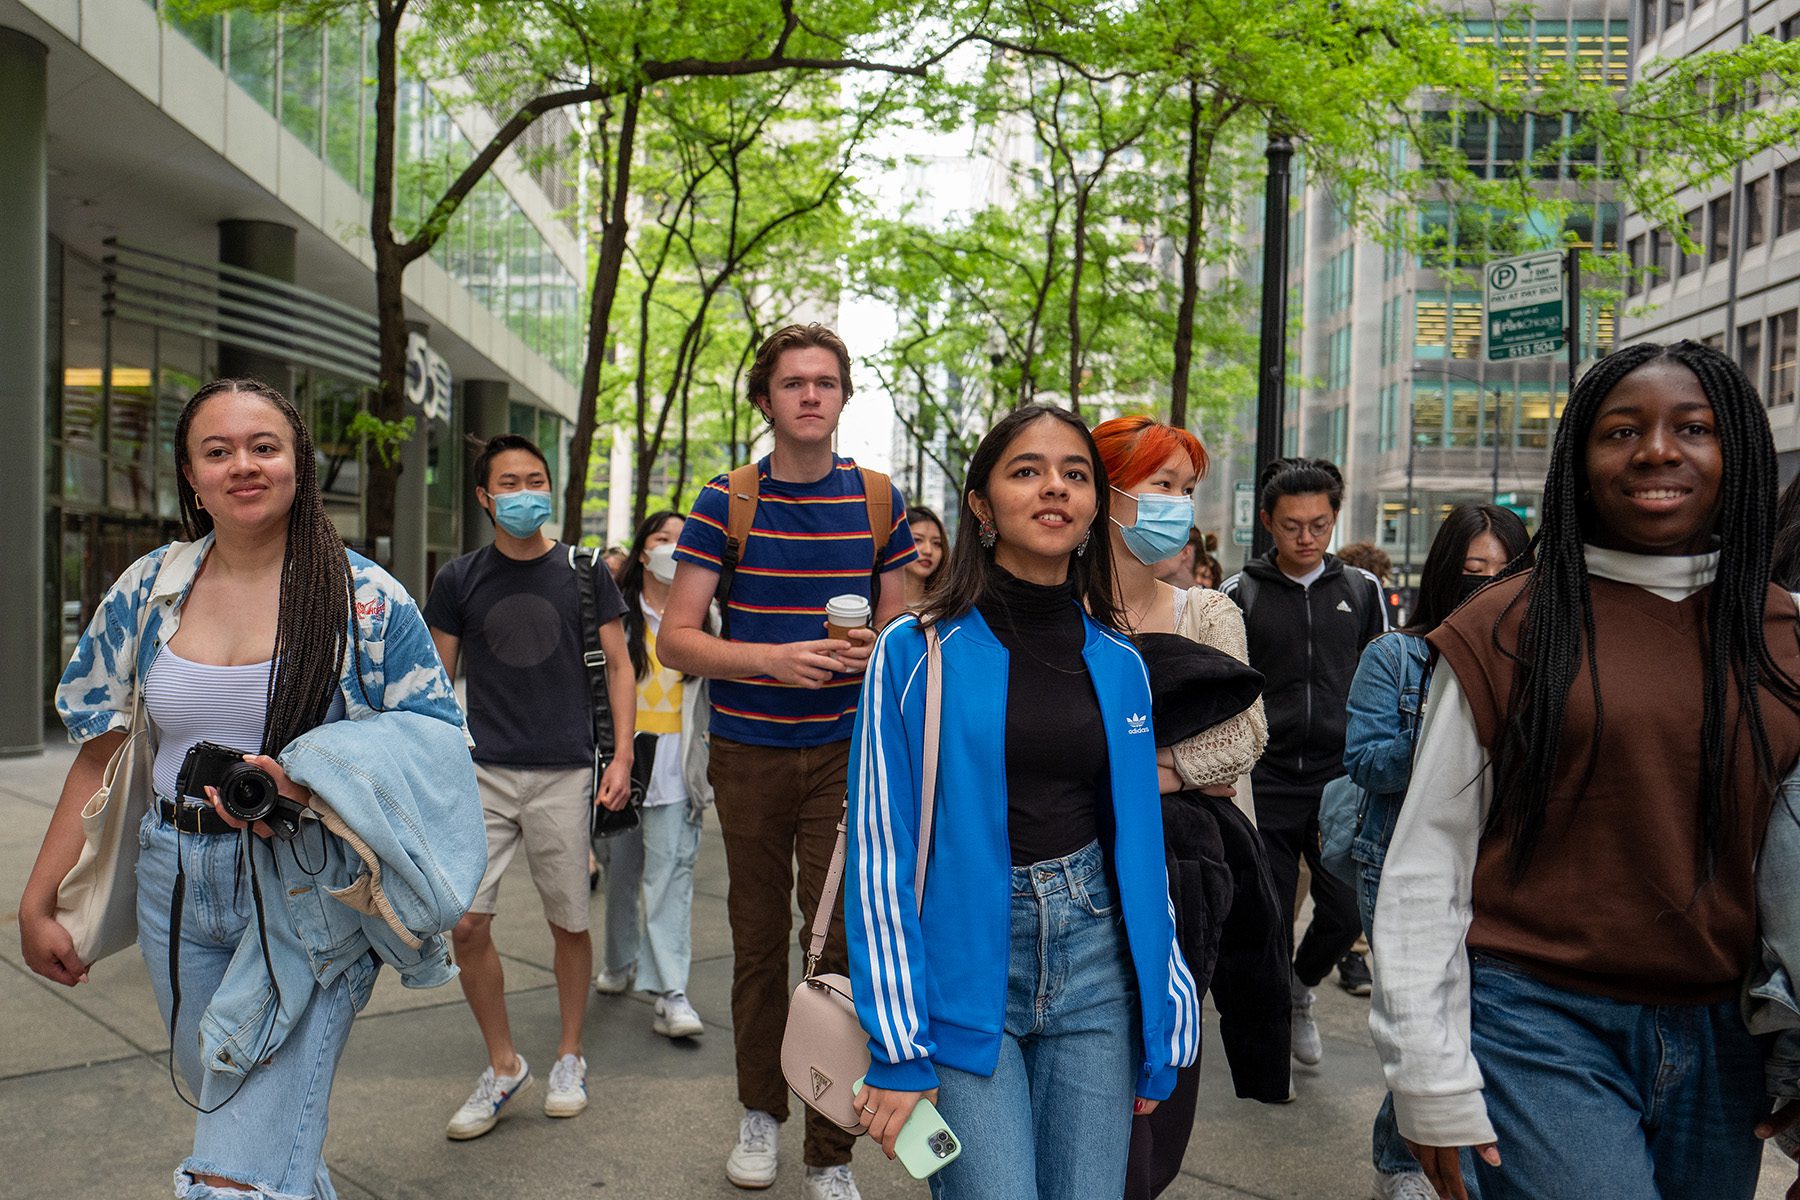 A group of students walks through a downtown corridor of buildings and greenery.